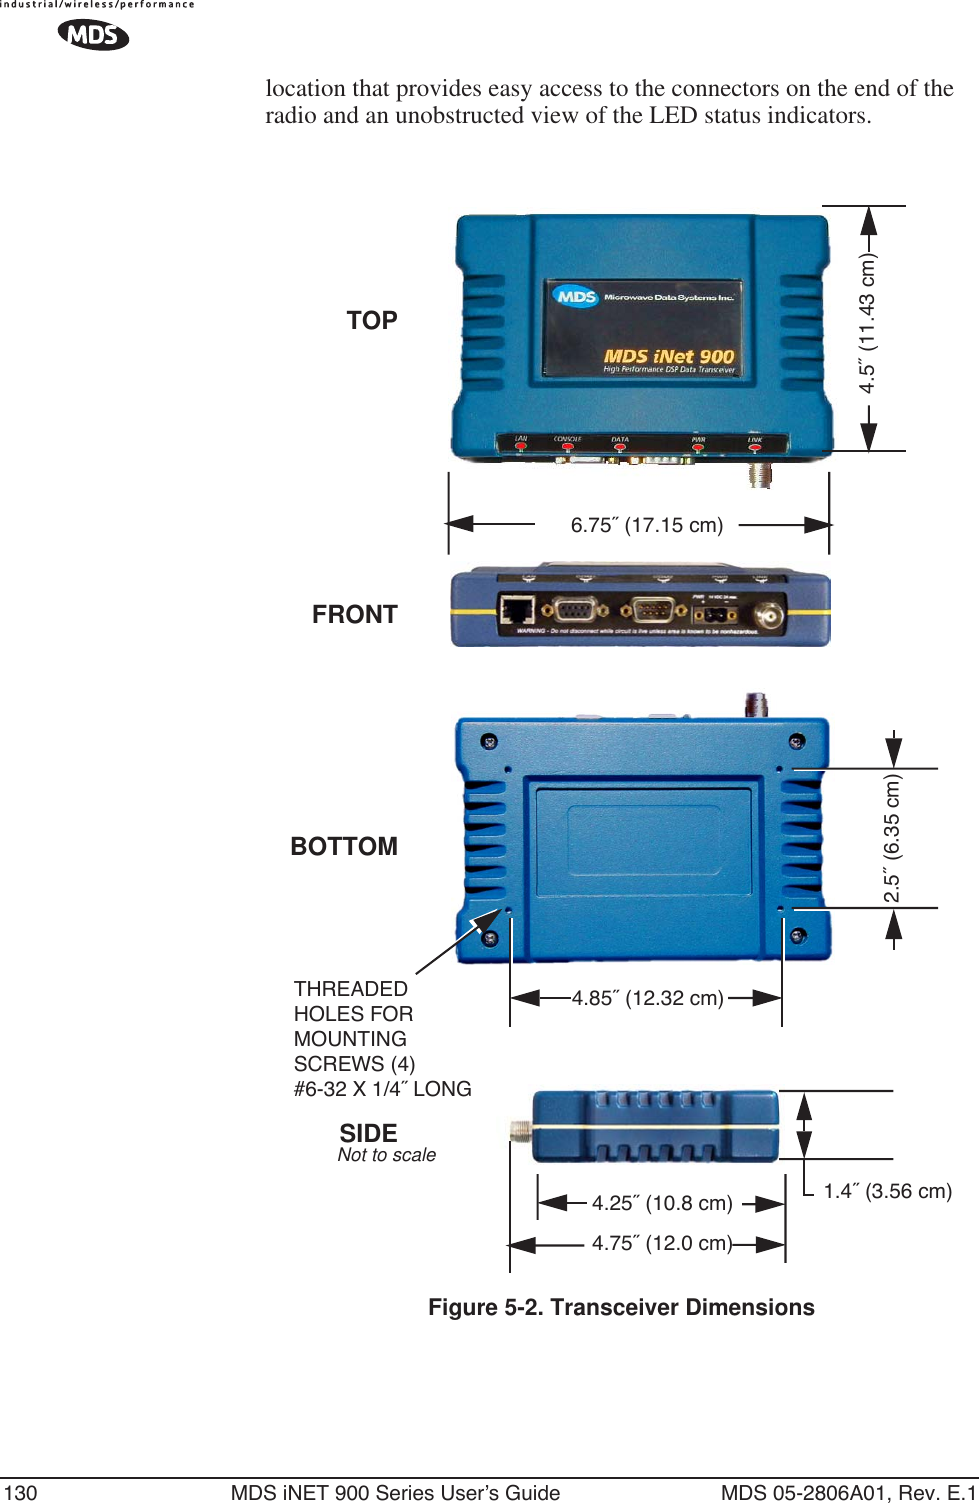 130 MDS iNET 900 Series User’s Guide MDS 05-2806A01, Rev. E.1location that provides easy access to the connectors on the end of the radio and an unobstructed view of the LED status indicators.Figure 5-2. Transceiver Dimensions4.25˝ (10.8 cm)4.75˝ (12.0 cm)1.4˝ (3.56 cm)6.75˝ (17.15 cm)4.5˝ (11.43 cm)TOPSIDEBOTTOM2.5˝ (6.35 cm)4.85˝ (12.32 cm)THREADEDHOLES FORMOUNTINGSCREWS (4)#6-32 X 1/4˝ LONGNot to scaleFRONT